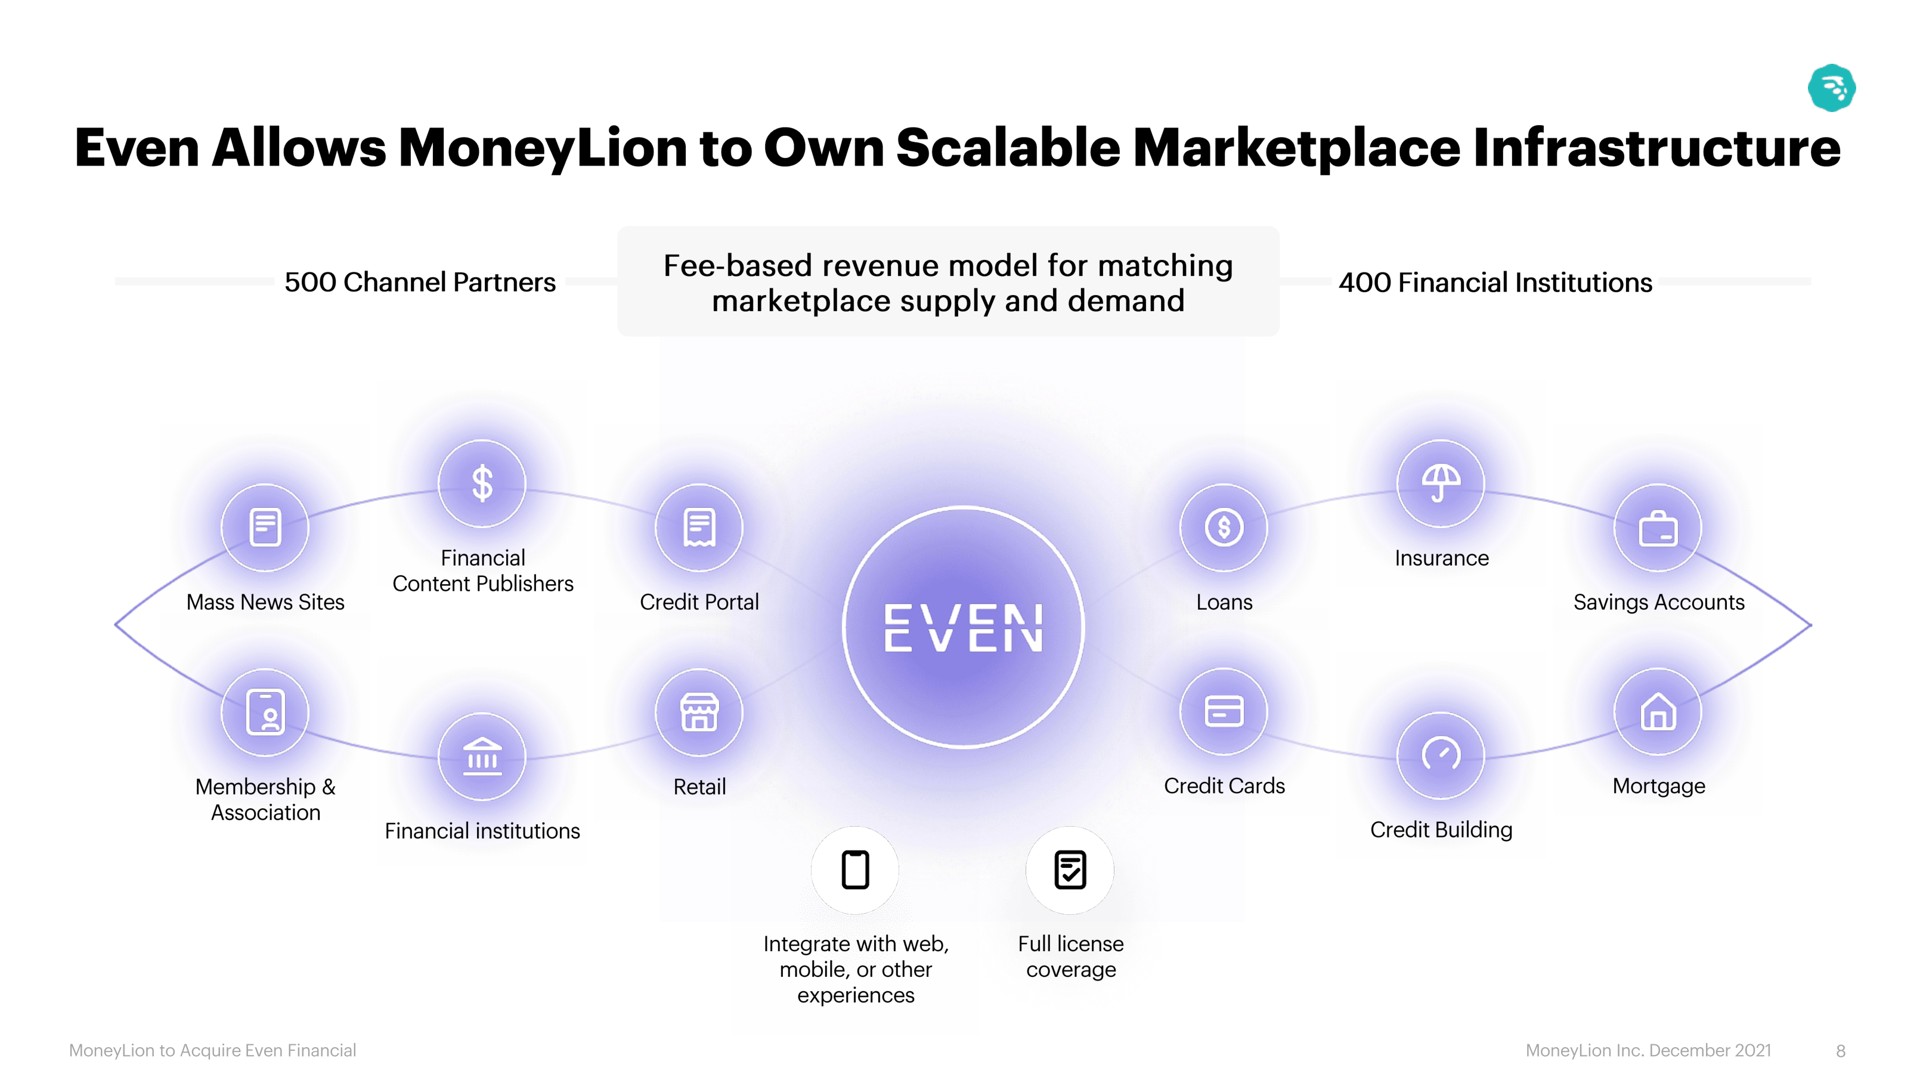 even allows to own scalable infrastructure | MoneyLion